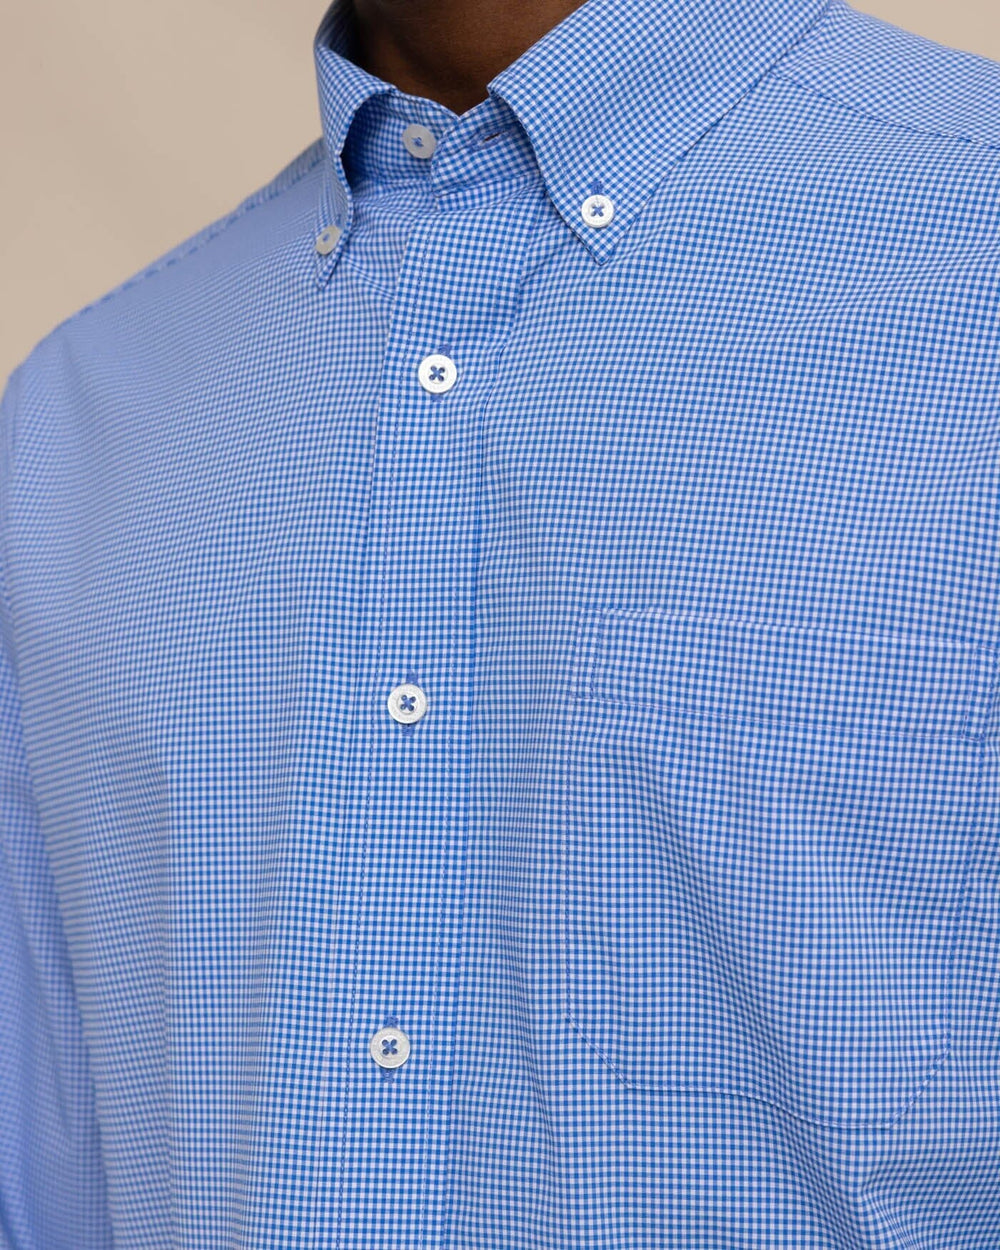 The front view of the Men's Micro Gingham Brrr Intercoastal Sport Shirt by Southern Tide - Cobalt Blue